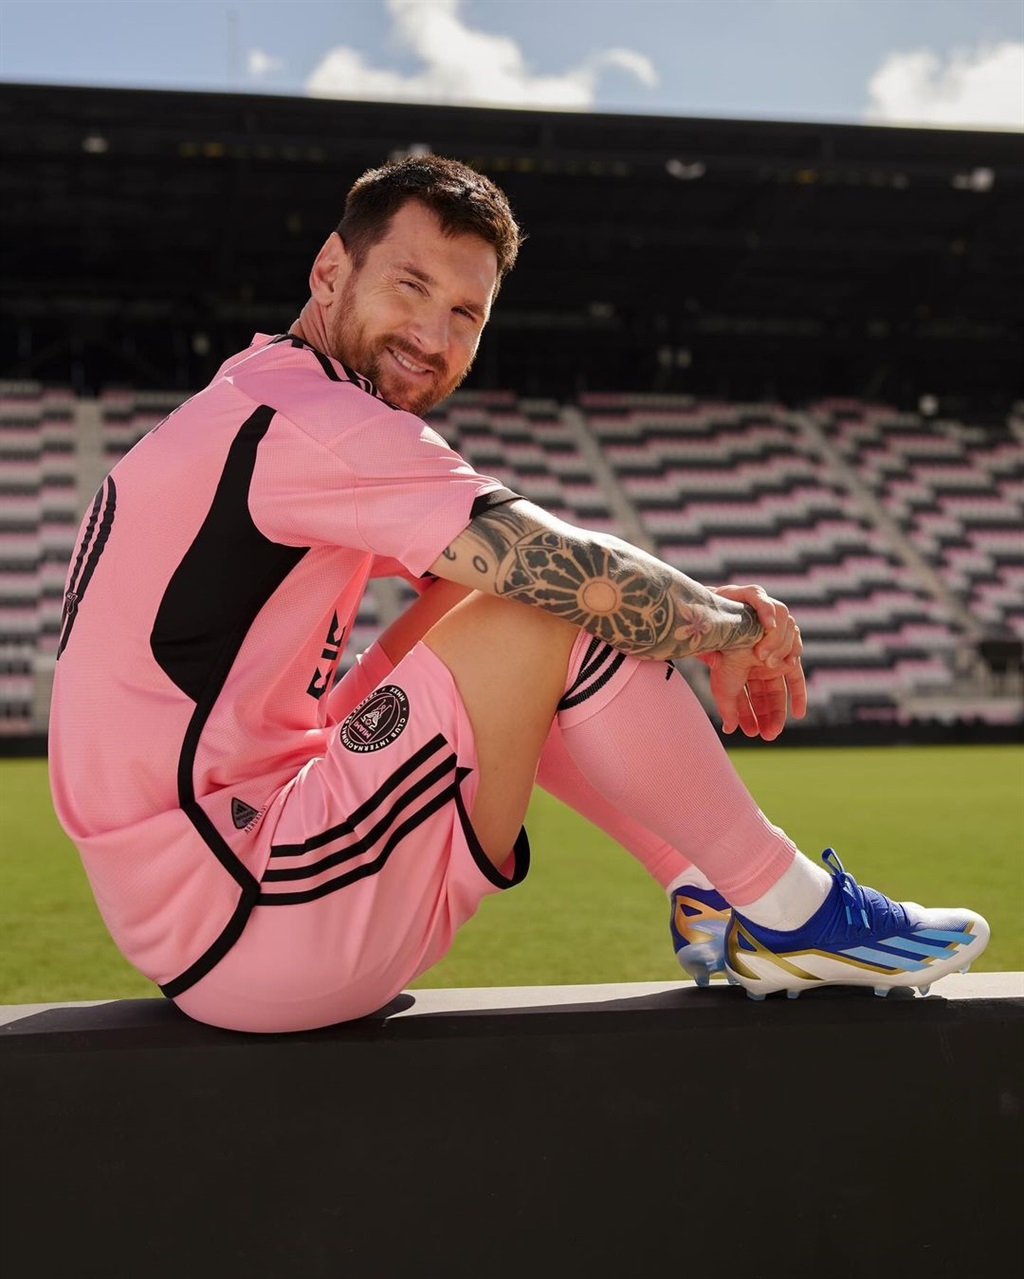 Inter Miami's Lionel Messi has been listed in first place as the World's Most Marketable Athlete.